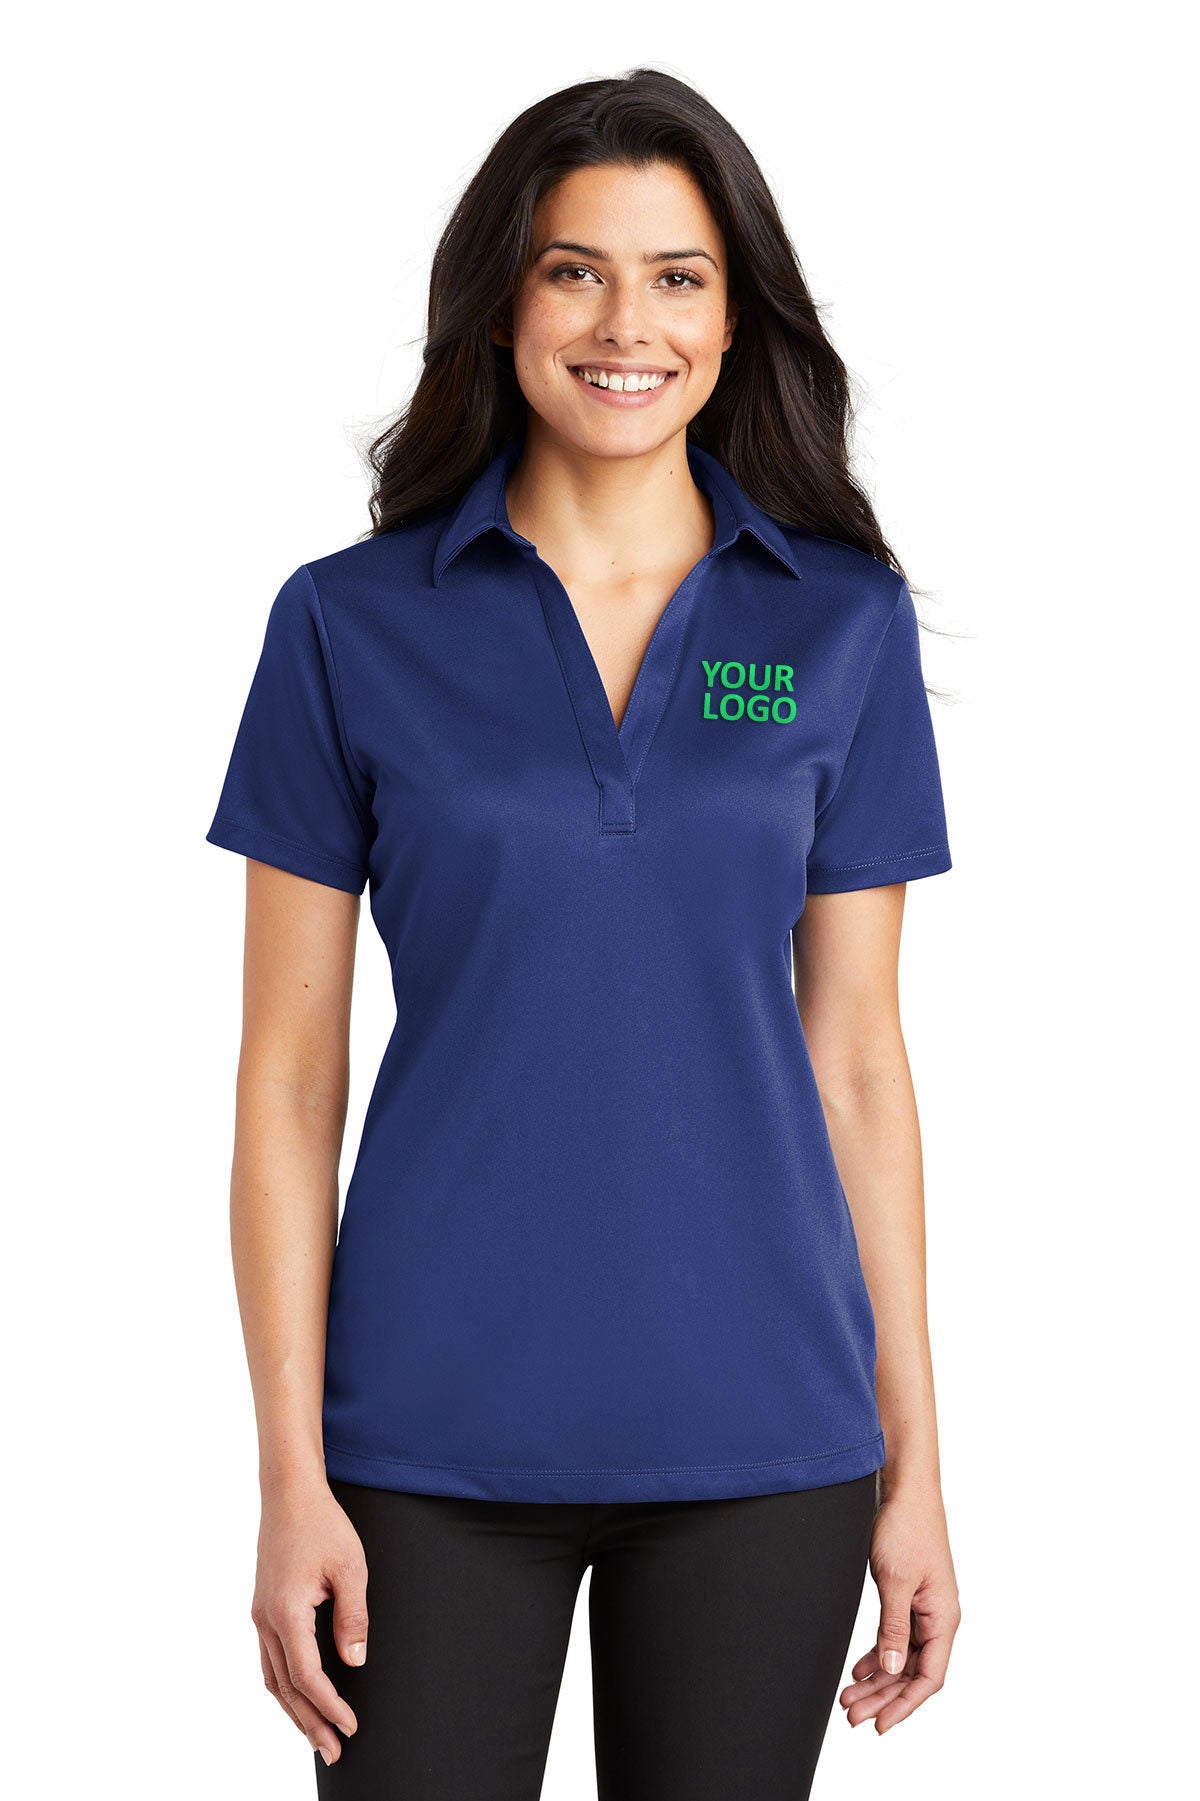 port authority royal l540 polo shirts with embroidered custom logo